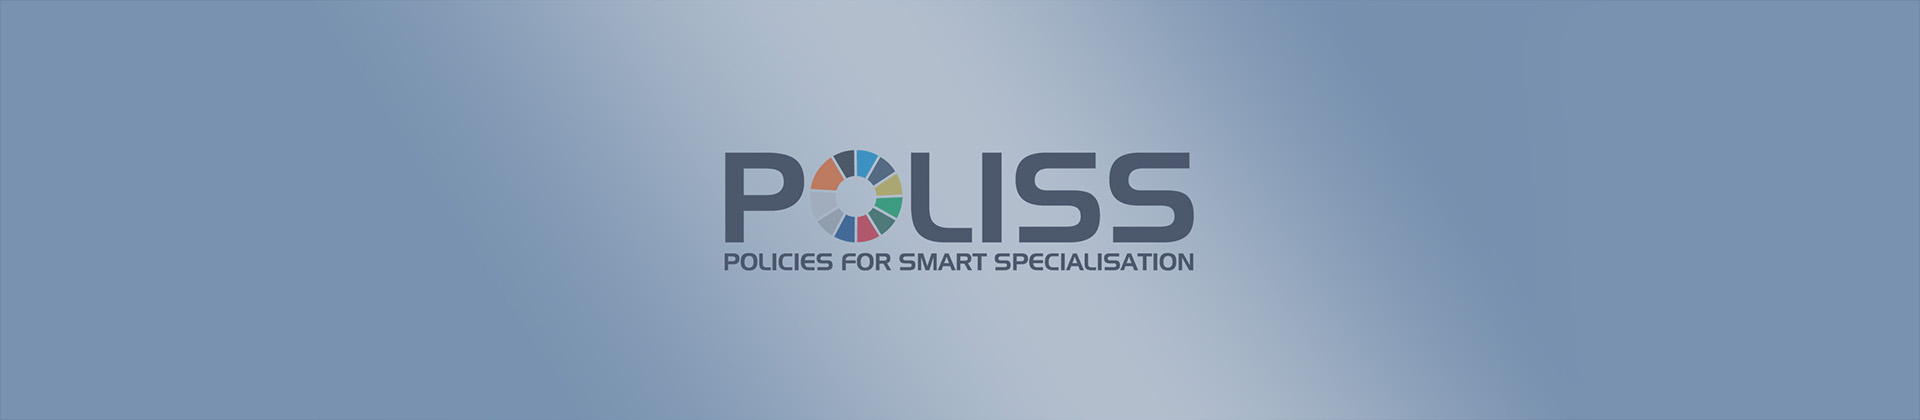 POLISS – Policies for Smart Specialisation